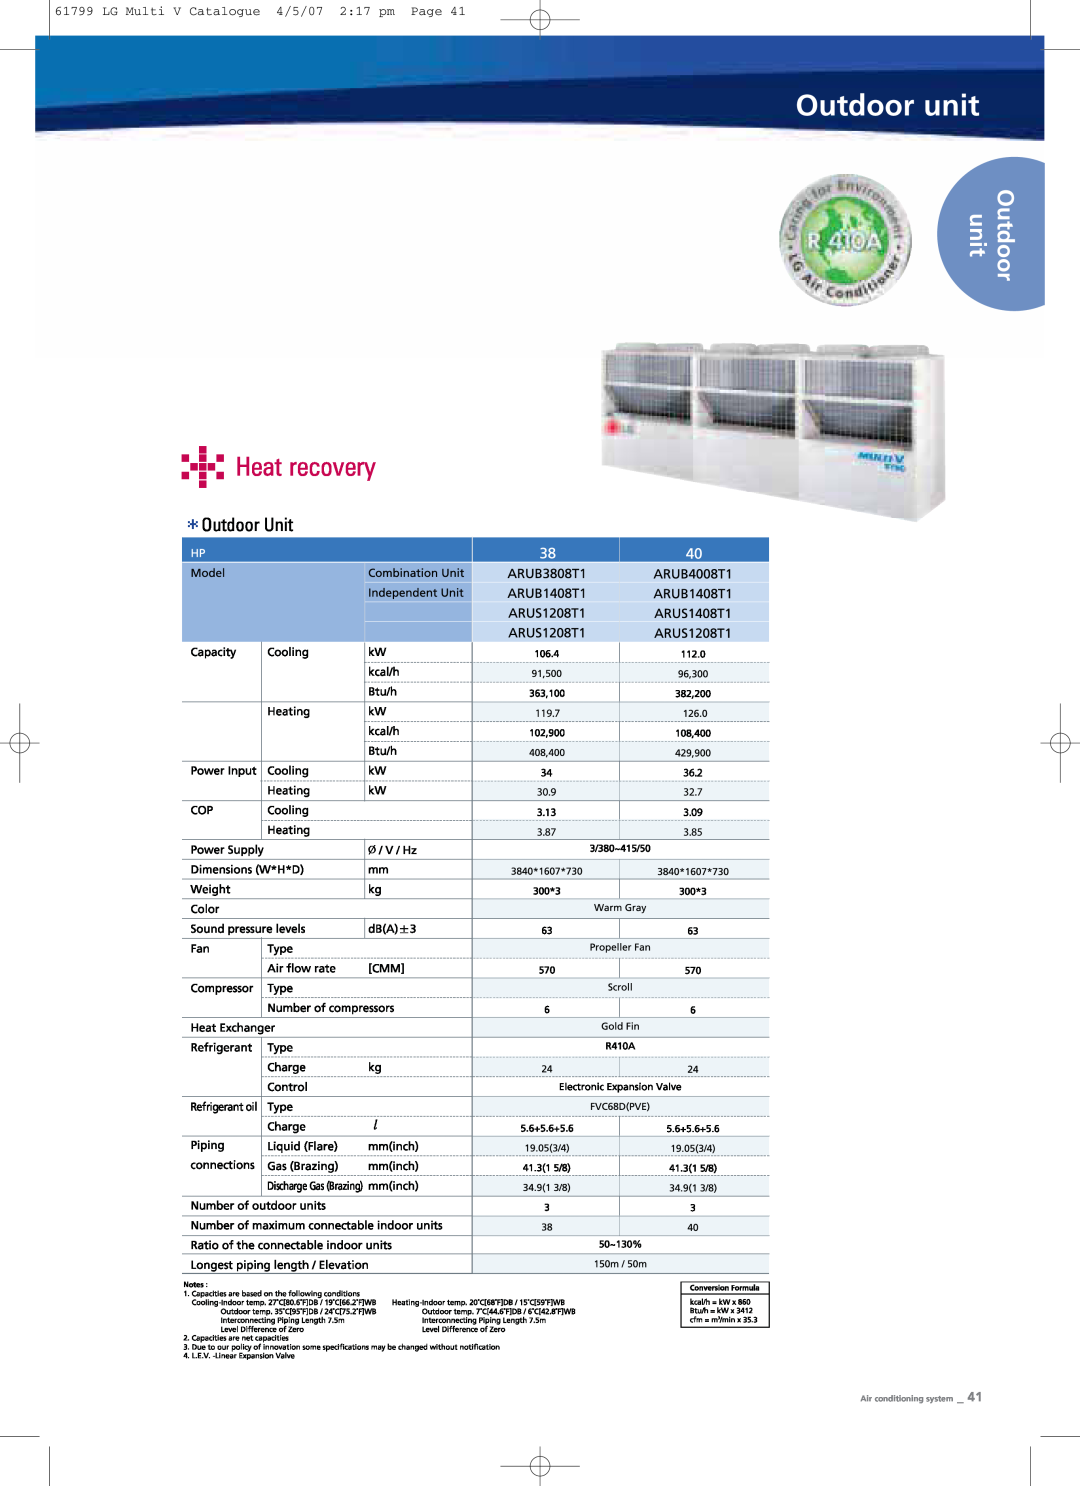 LG Electronics PRHR040 manual Outdoor unit, Heat recovery, LG Multi V Catalogue 4/5/07 217 pm Page, Air conditioning system 